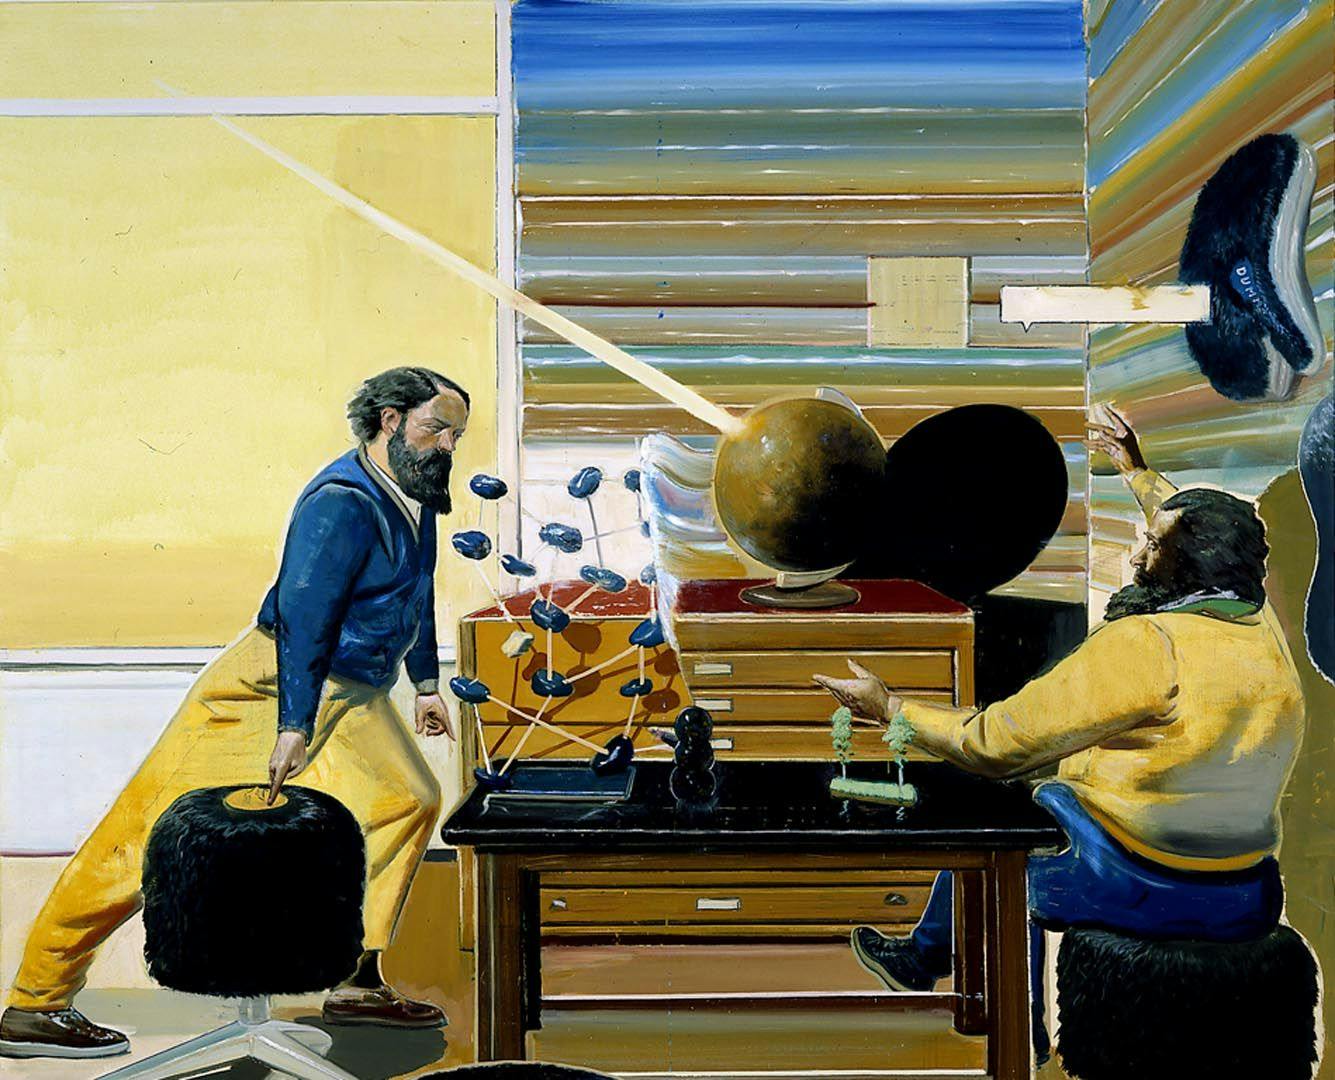 A painting by Neo Rauch, titled Sch√∂pfer, dated 2002.